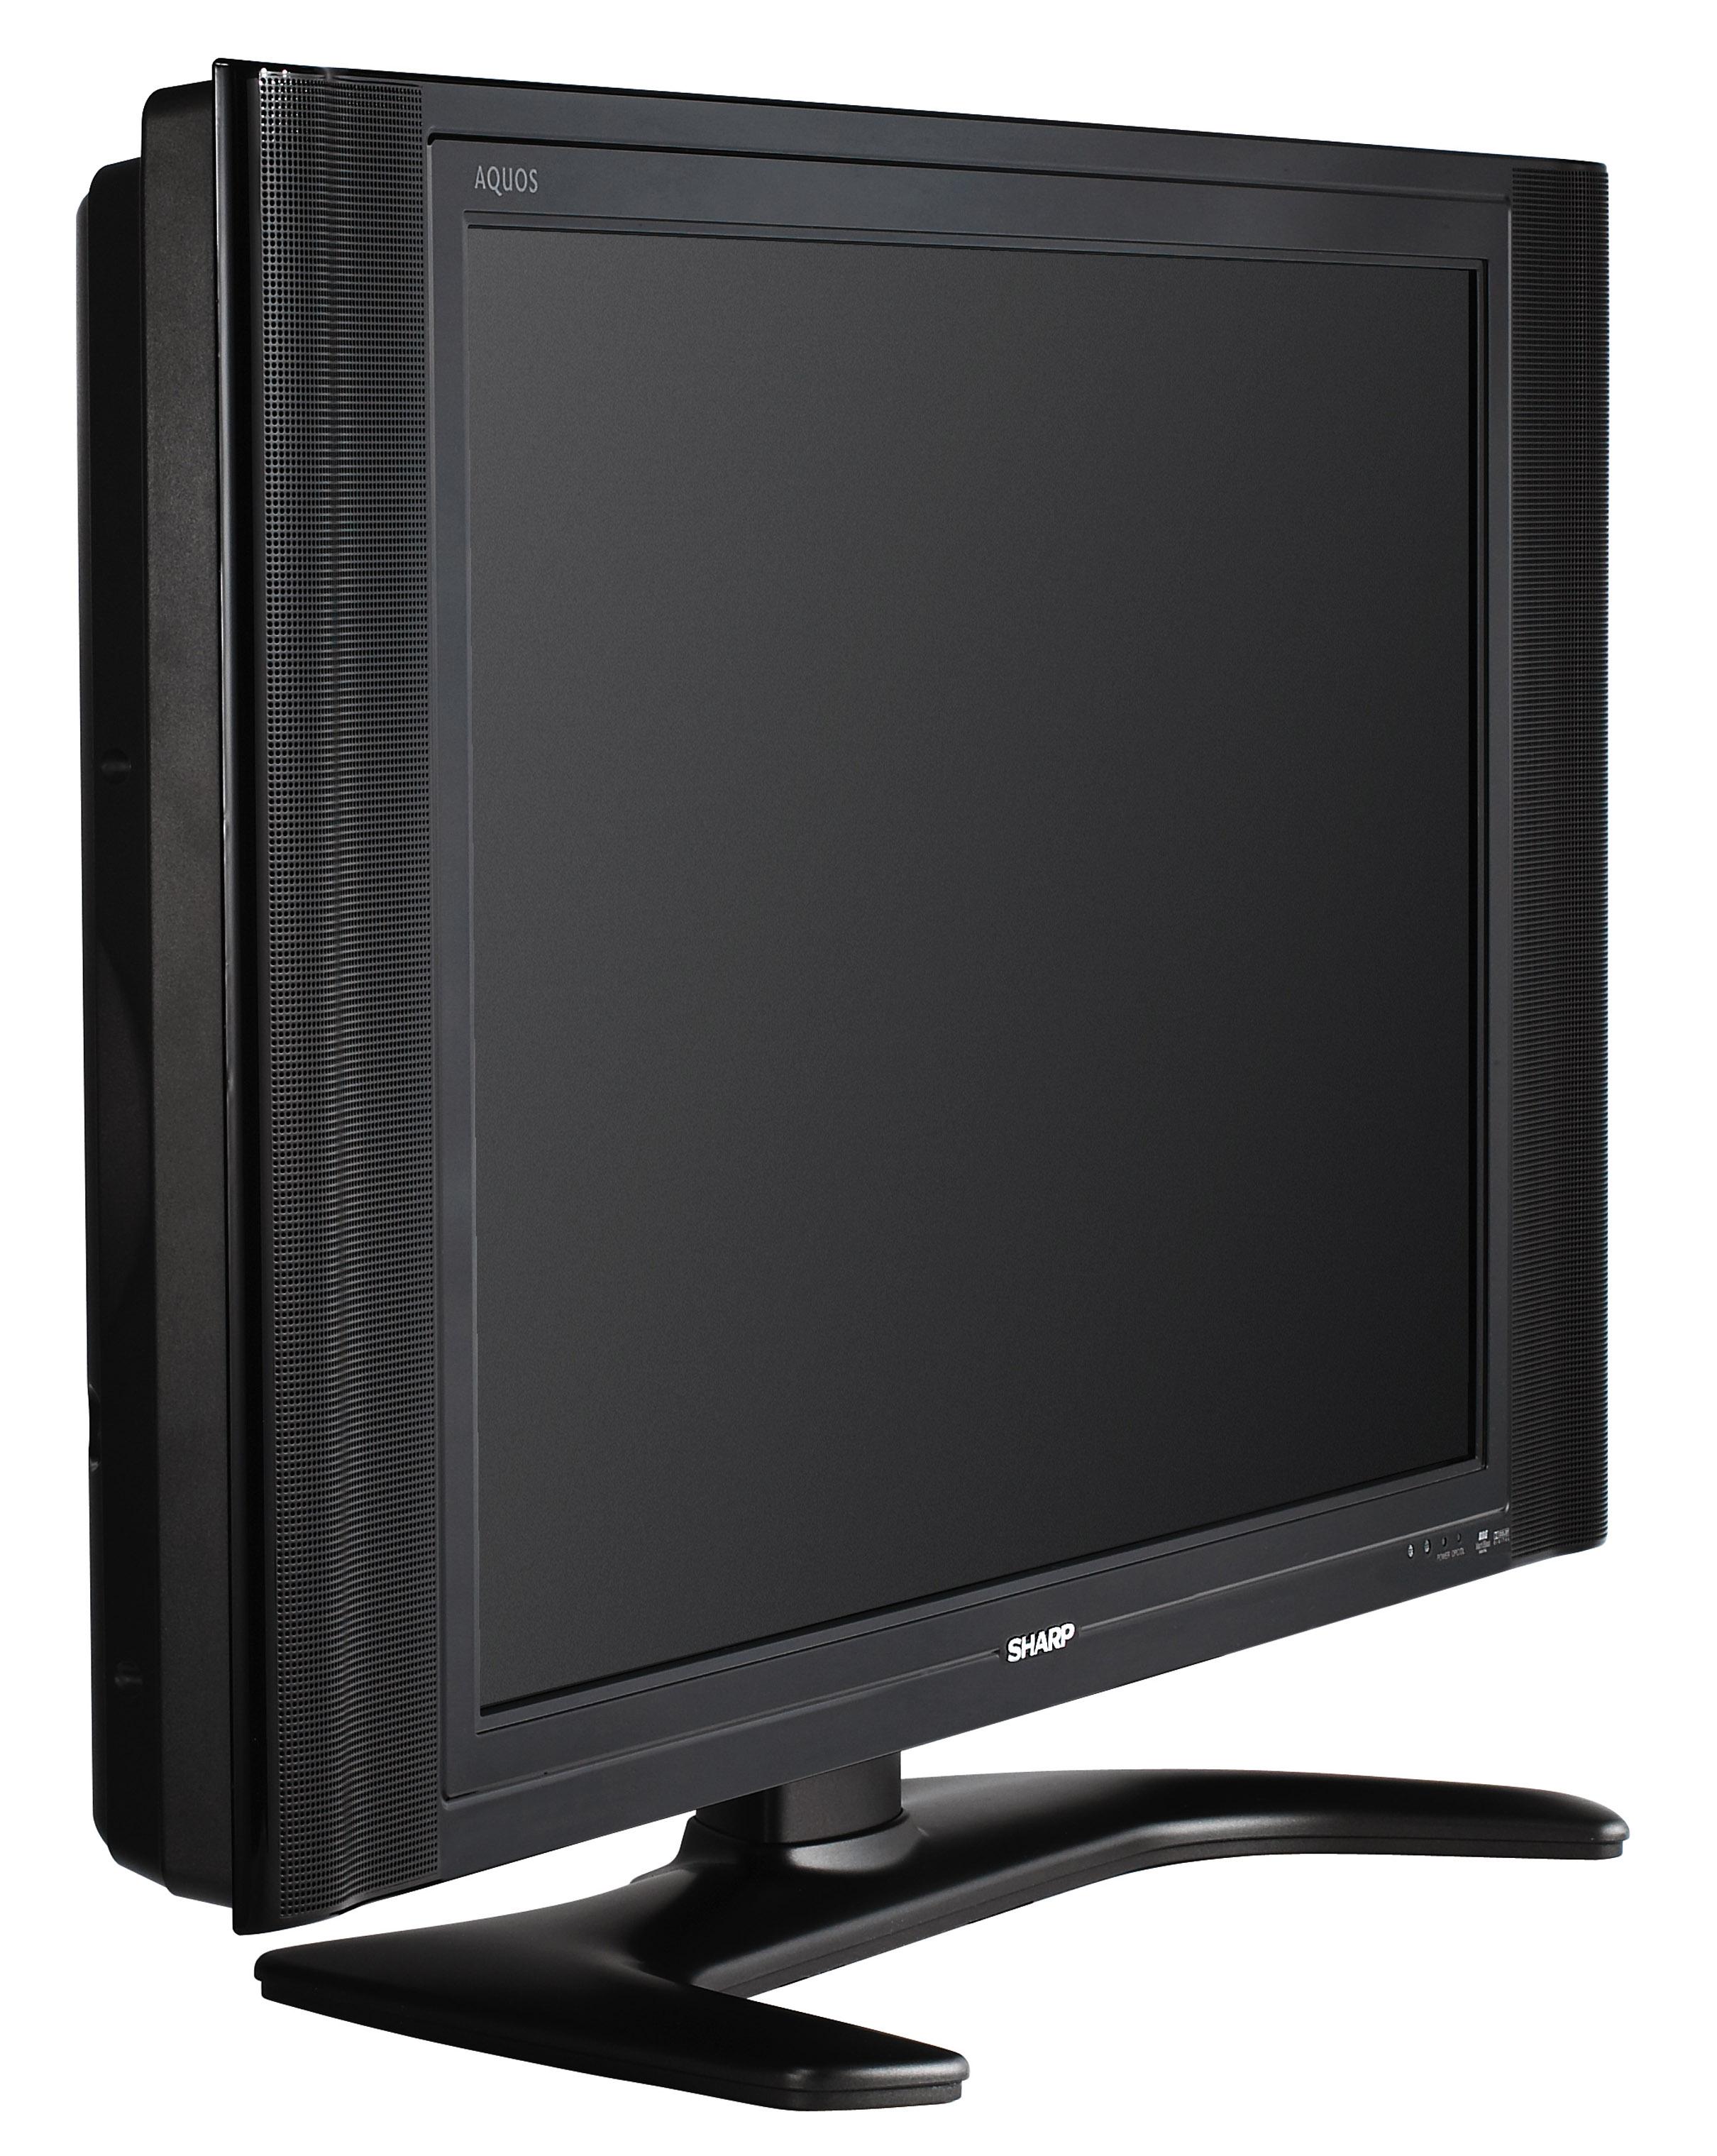 Sharp Lc 32d4u Aquos 32 Inch Lcd Television Overstock